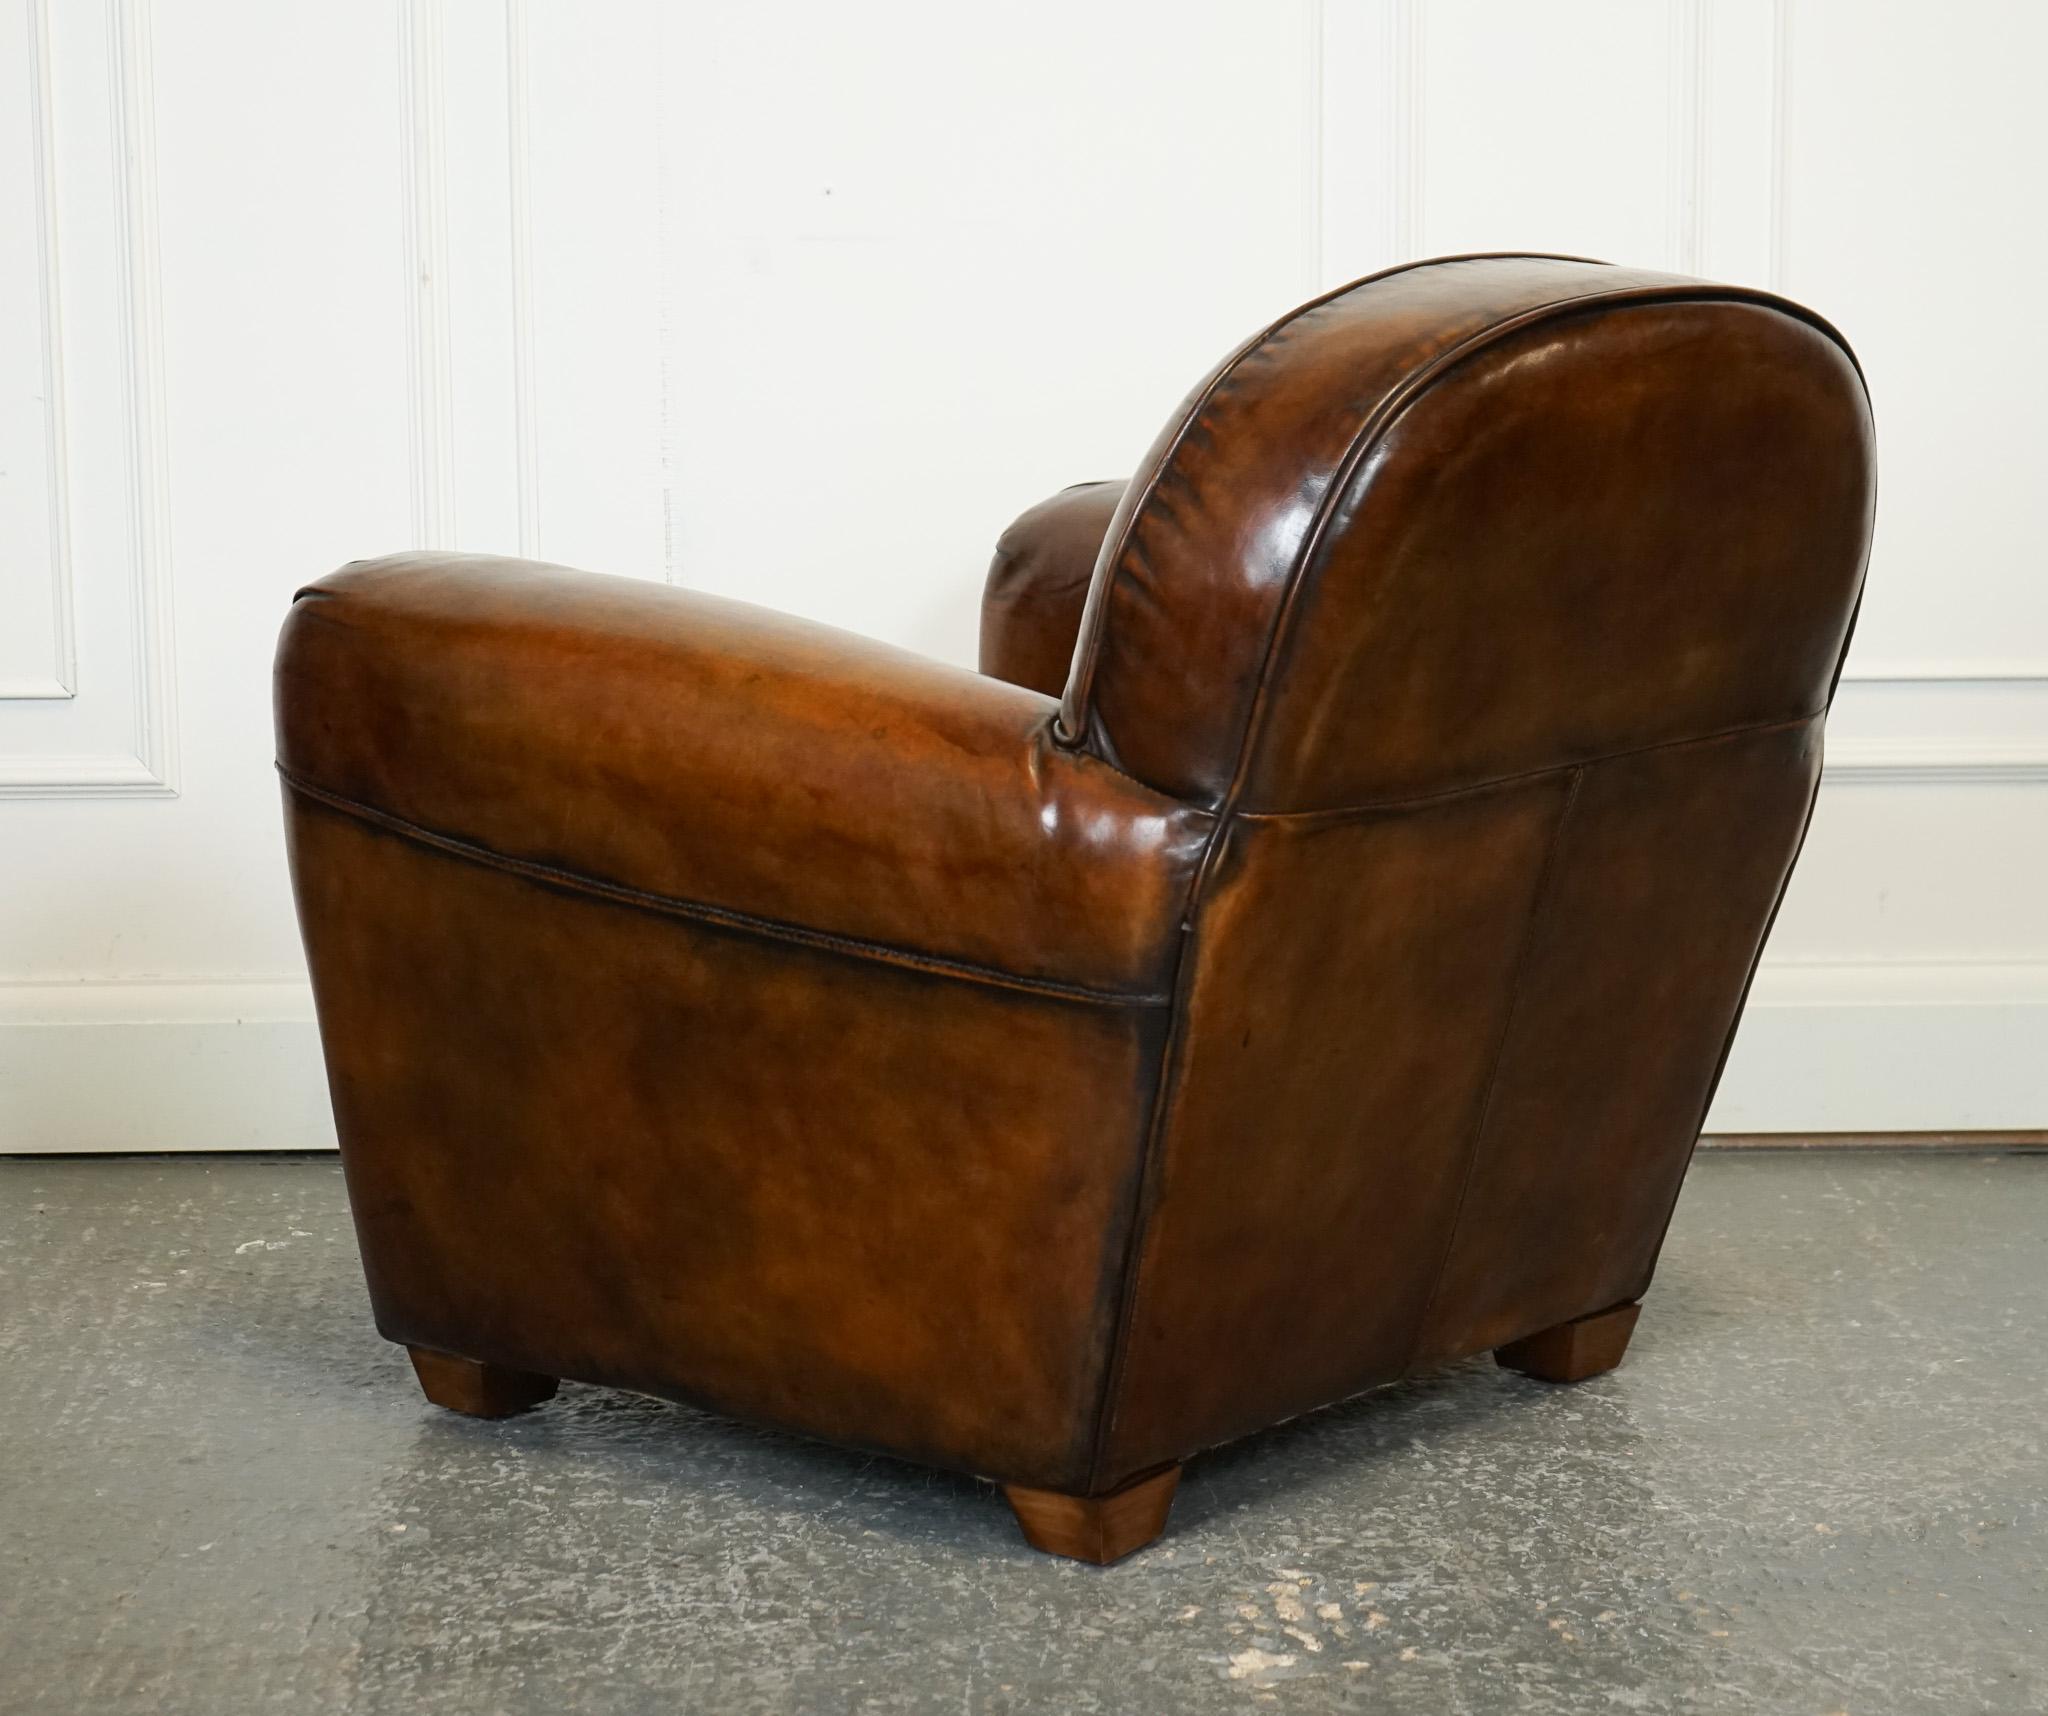 STUNNING PAiR OF ART DECO Style HAND DYED WHISKEY BROWN CLUB ARMCHAIRS im Angebot 3